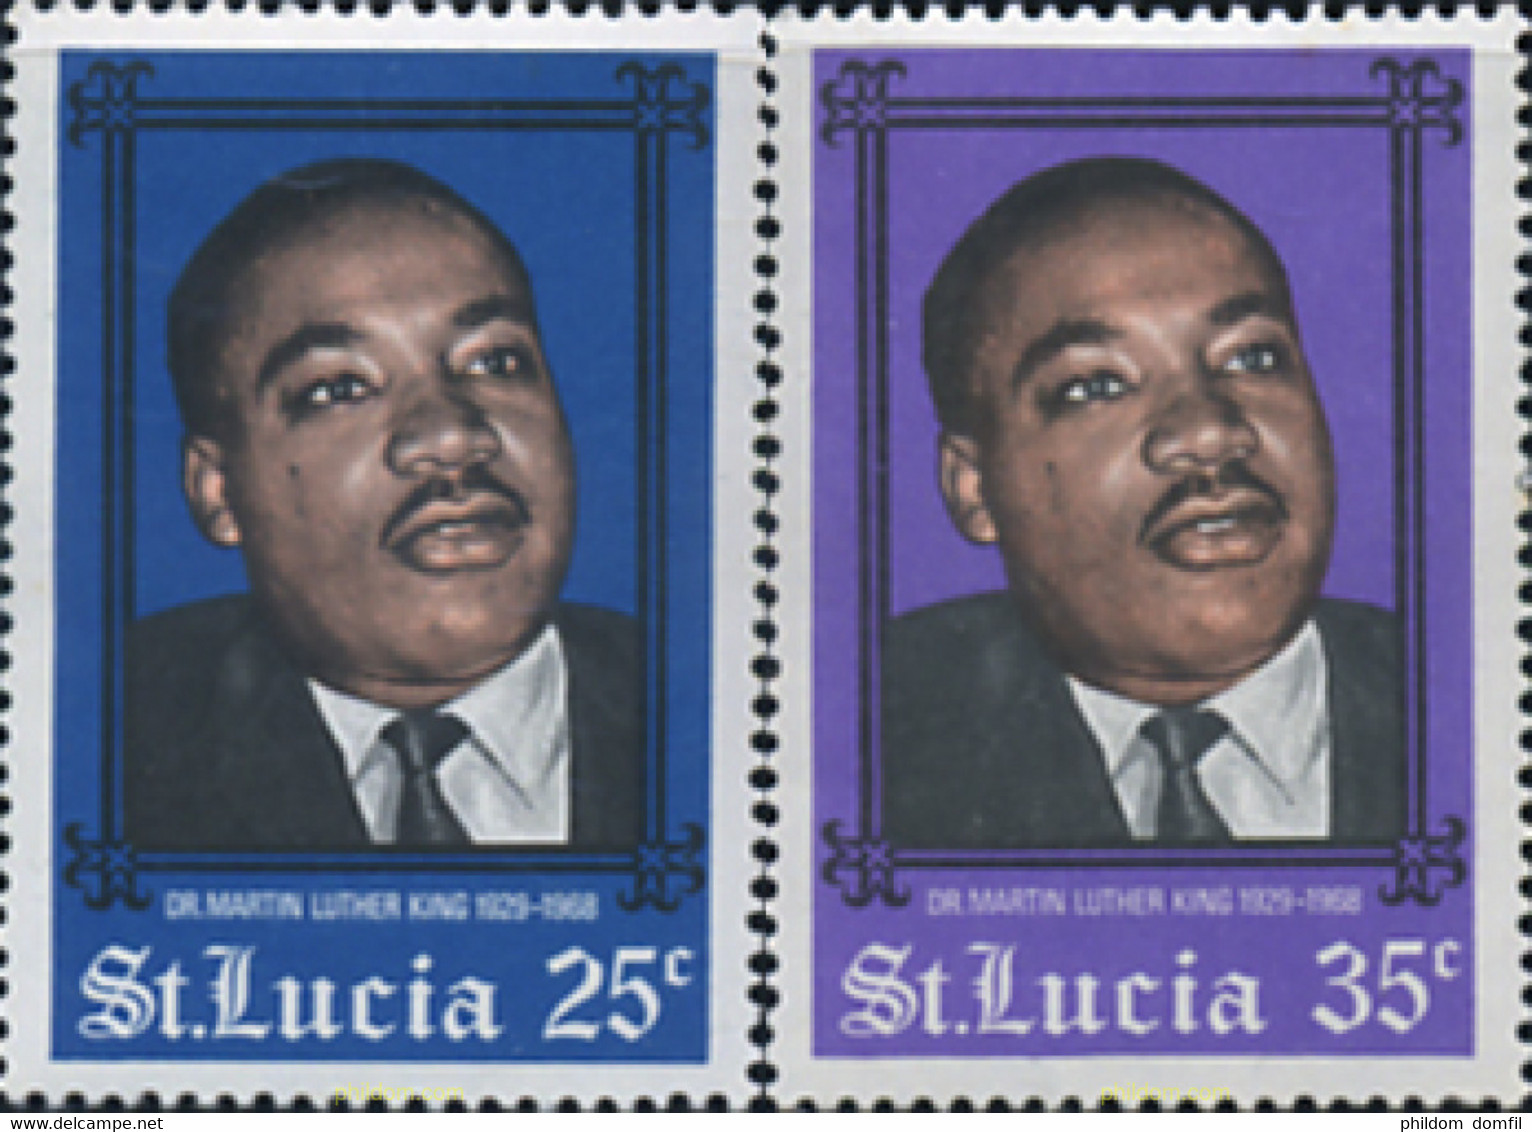 331487 MNH SANTA LUCIA 1968 DOCTOR MARTIN LUTHER KING - Martin Luther King